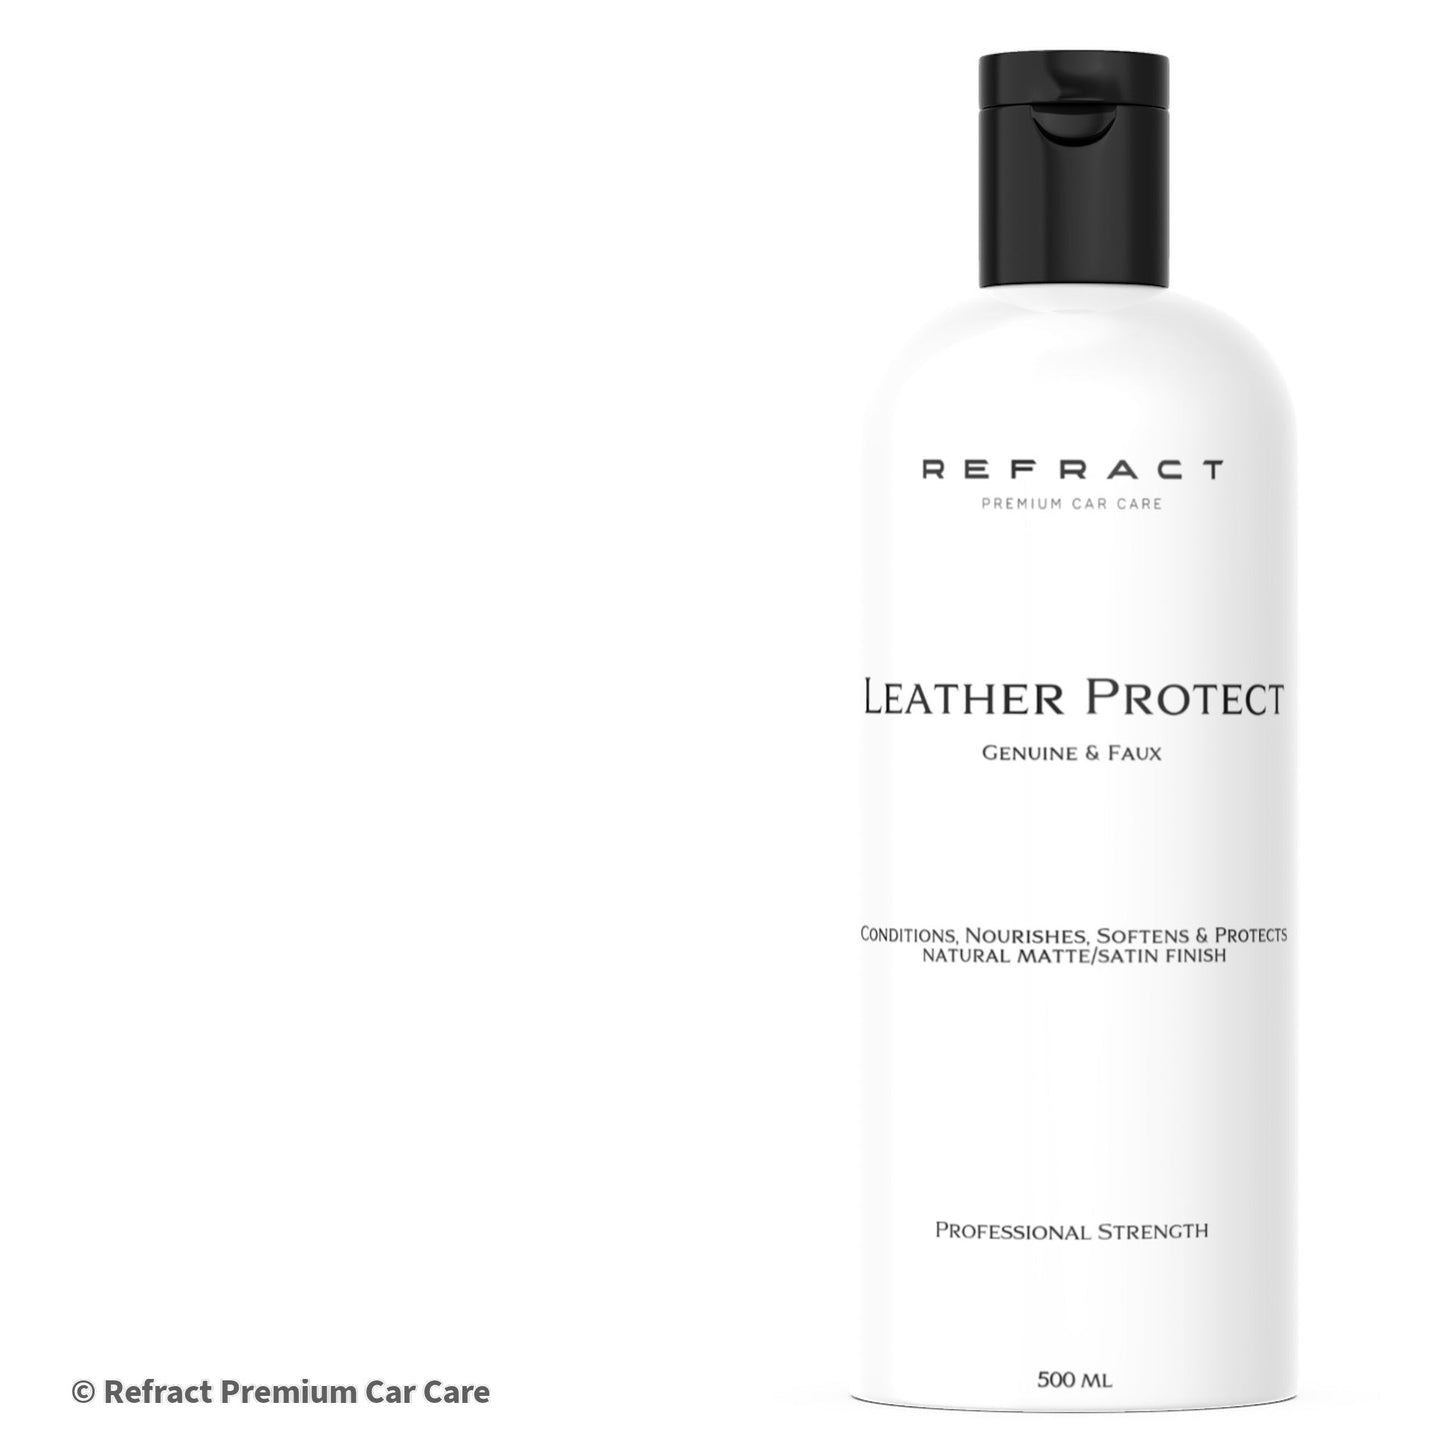 Refract Premium Car Care Products Refract Leather & Vinyl Protect $37.95